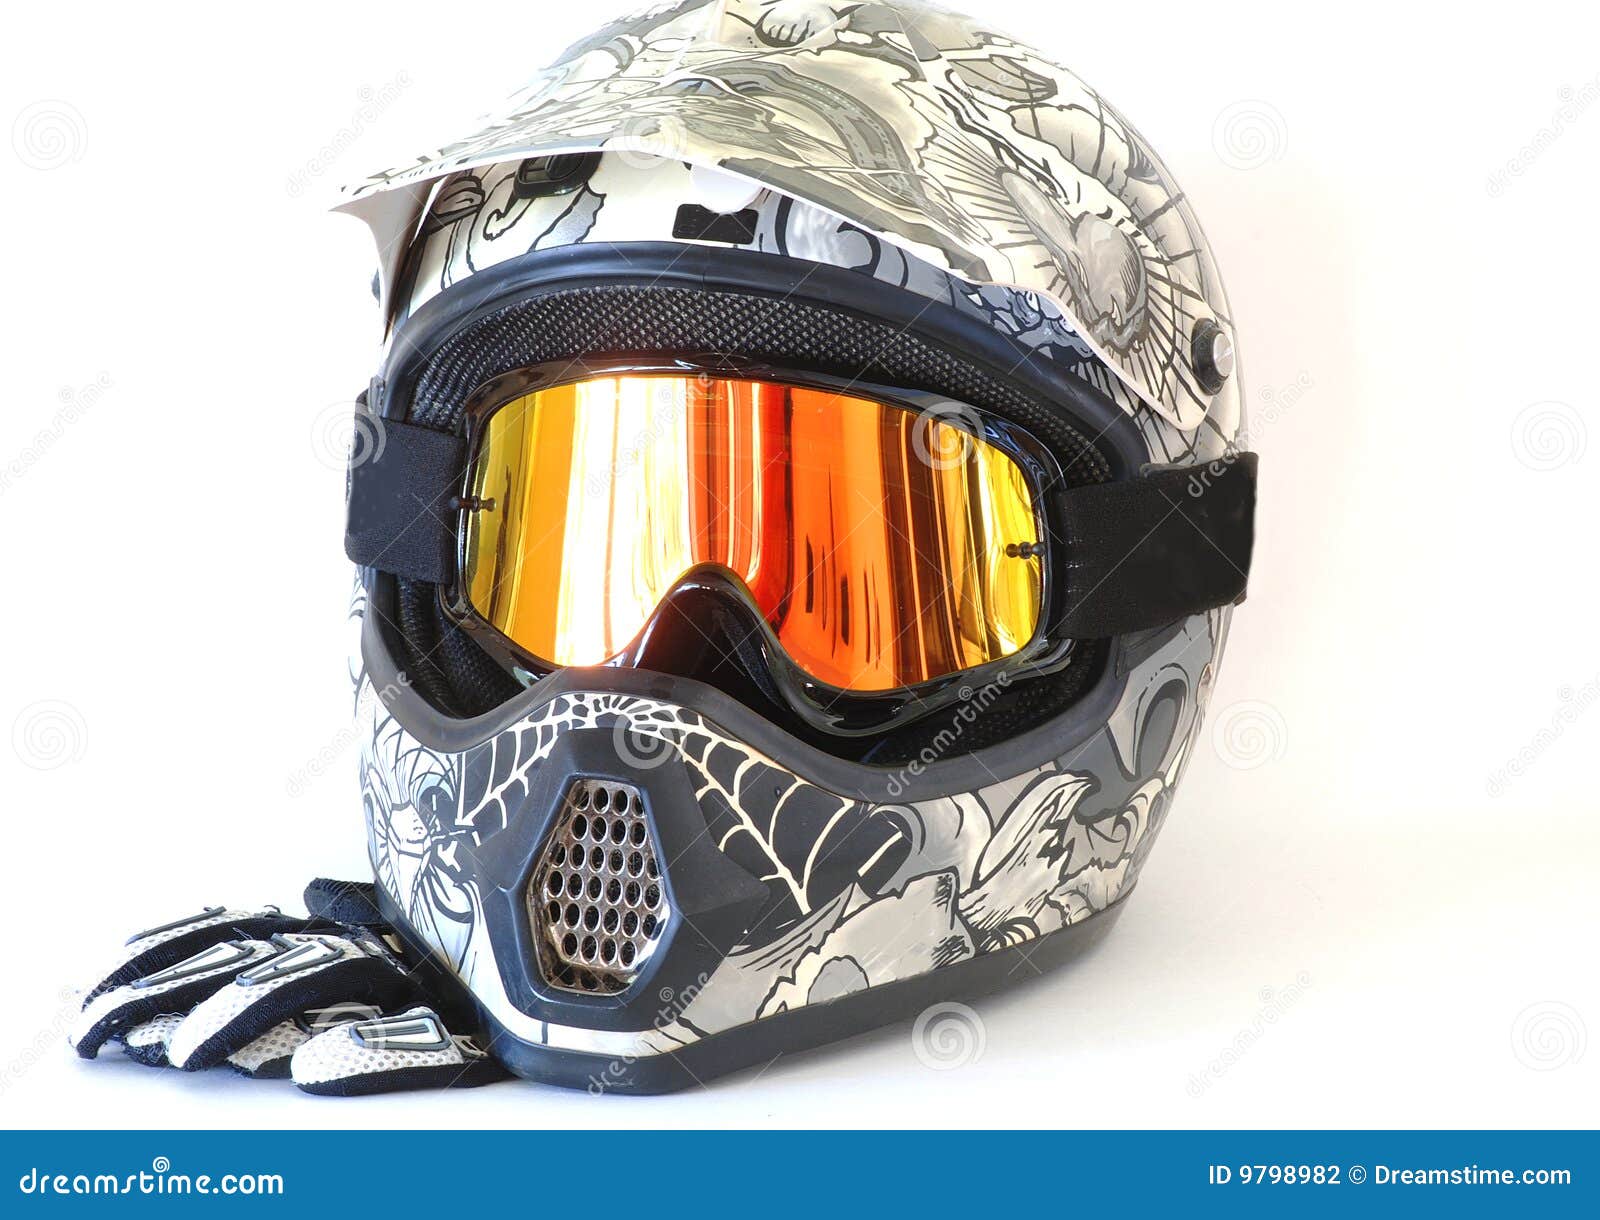 Motorcycle Helmet Goggles Gloves Stock Photo - Image of goggles